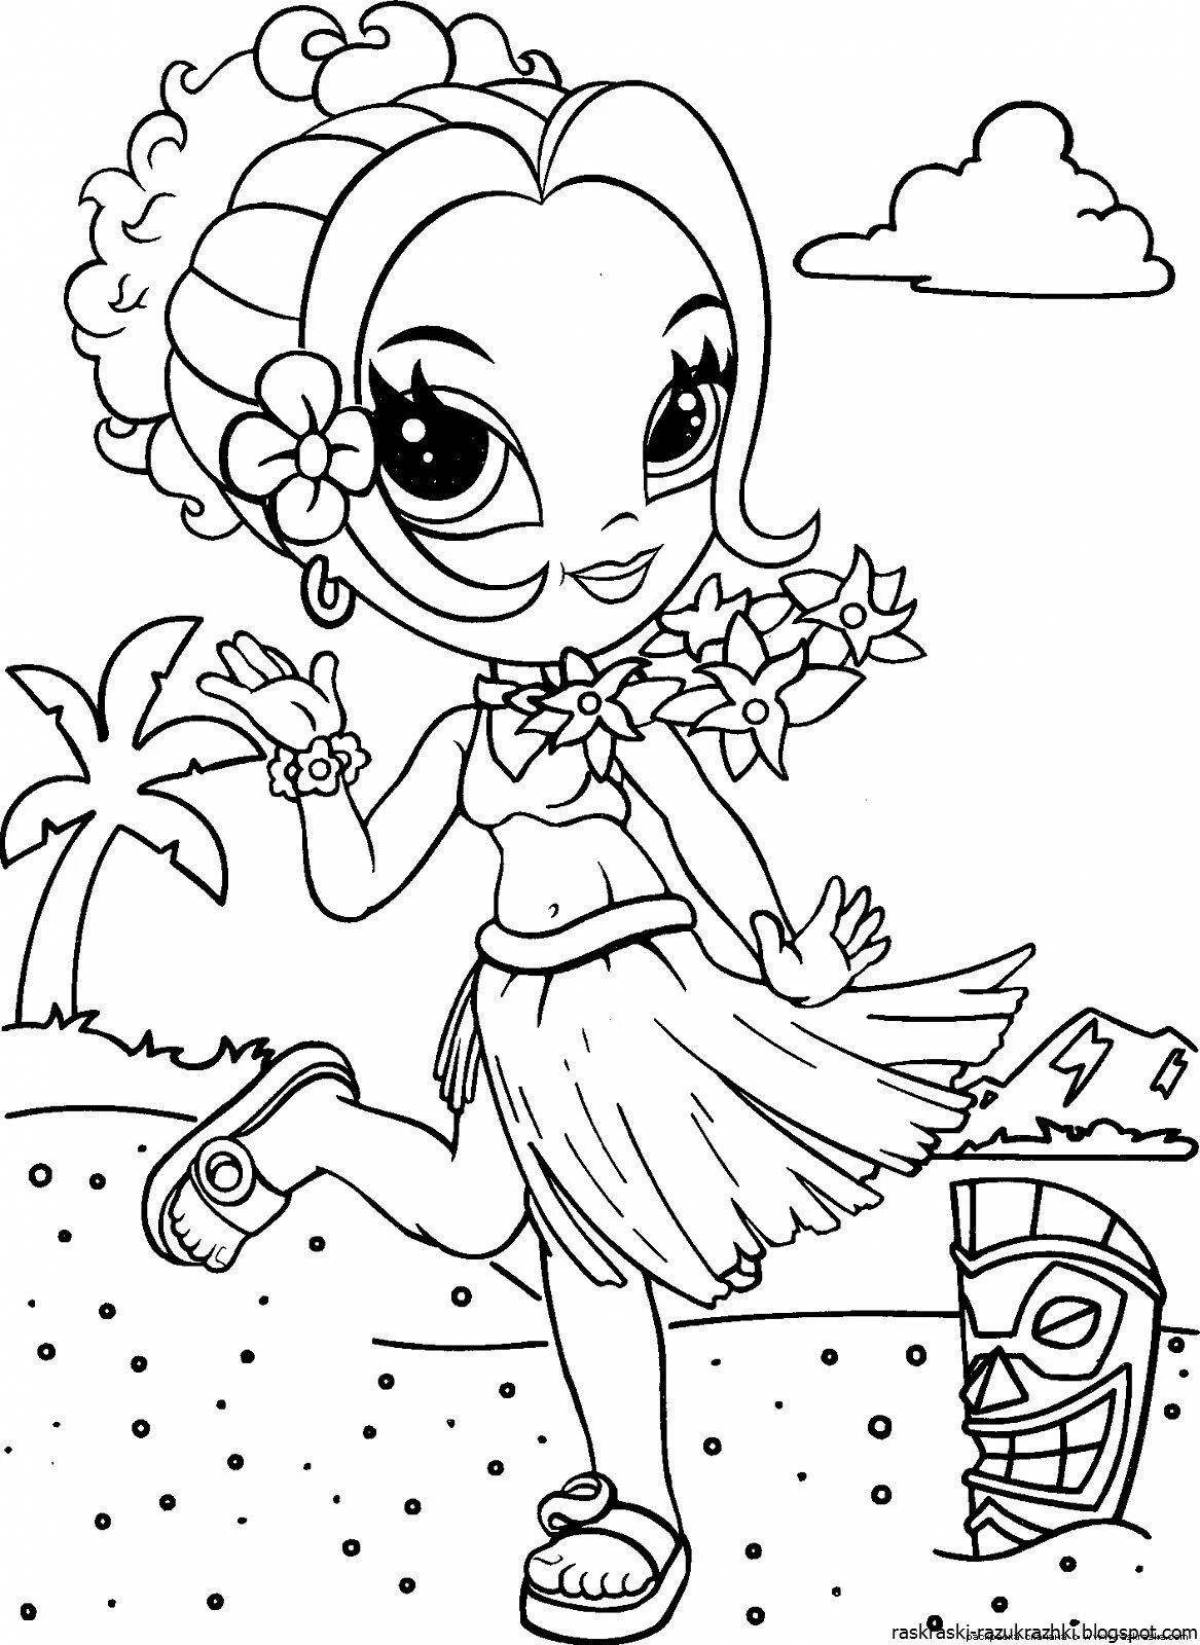 Magic coloring 4 for girls